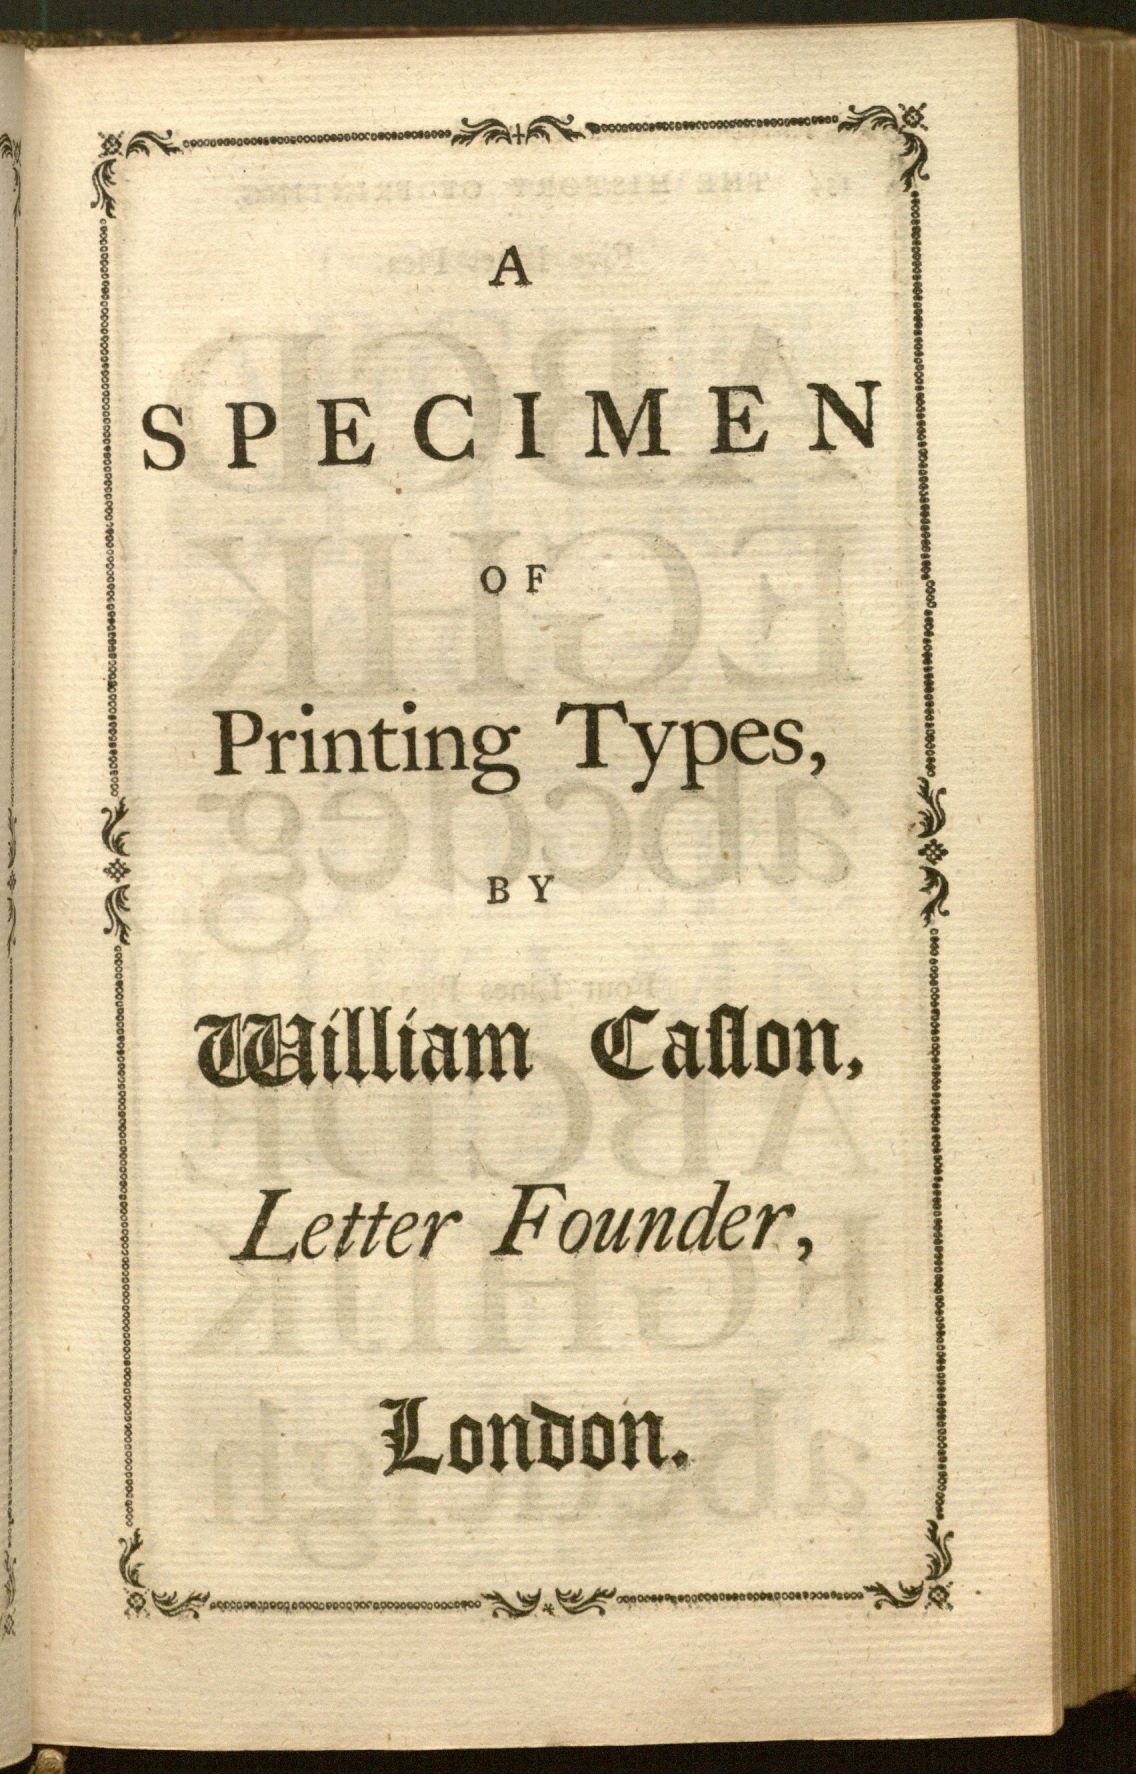 Caslon's Specimen of Printing Types from Luckombe's The History and Art of Printing (1771)